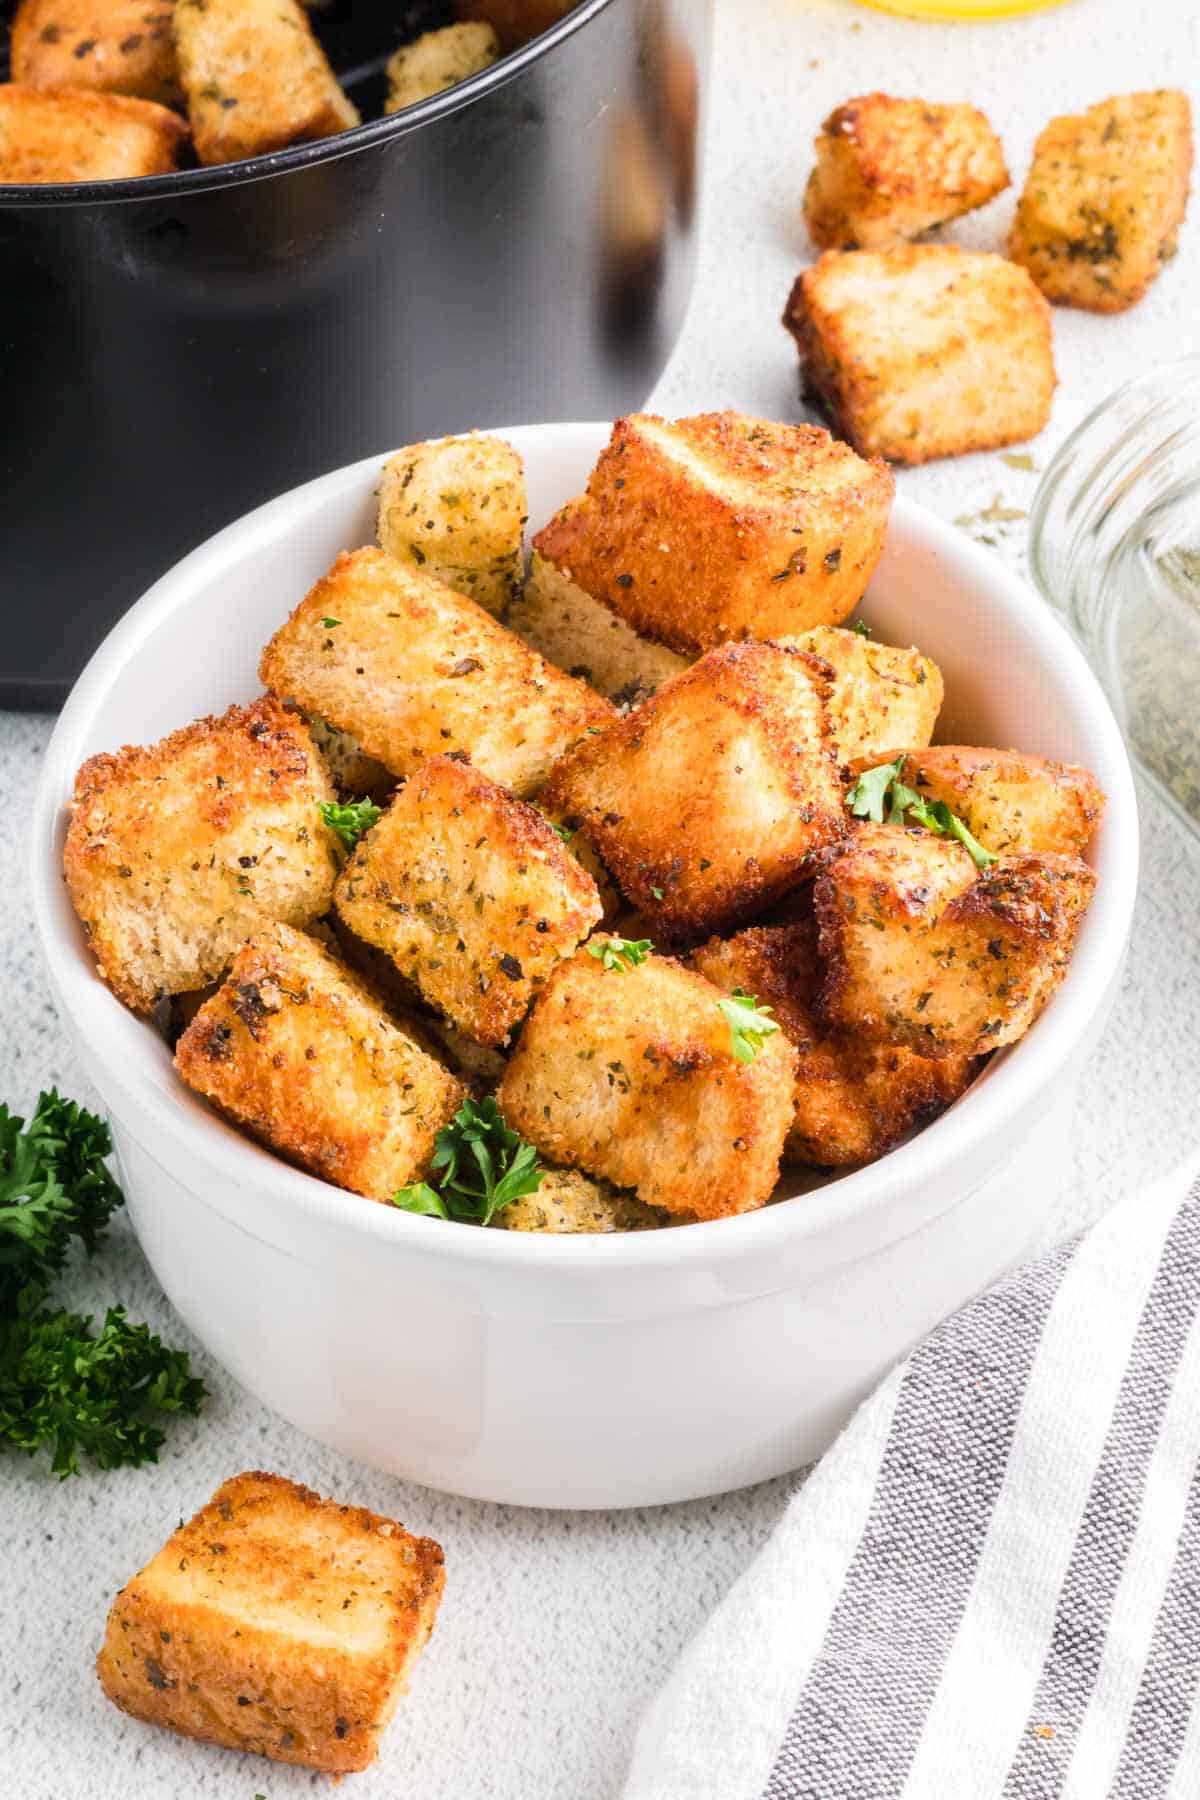 Homemade croutons in a white bowl garnished with fresh parsley.